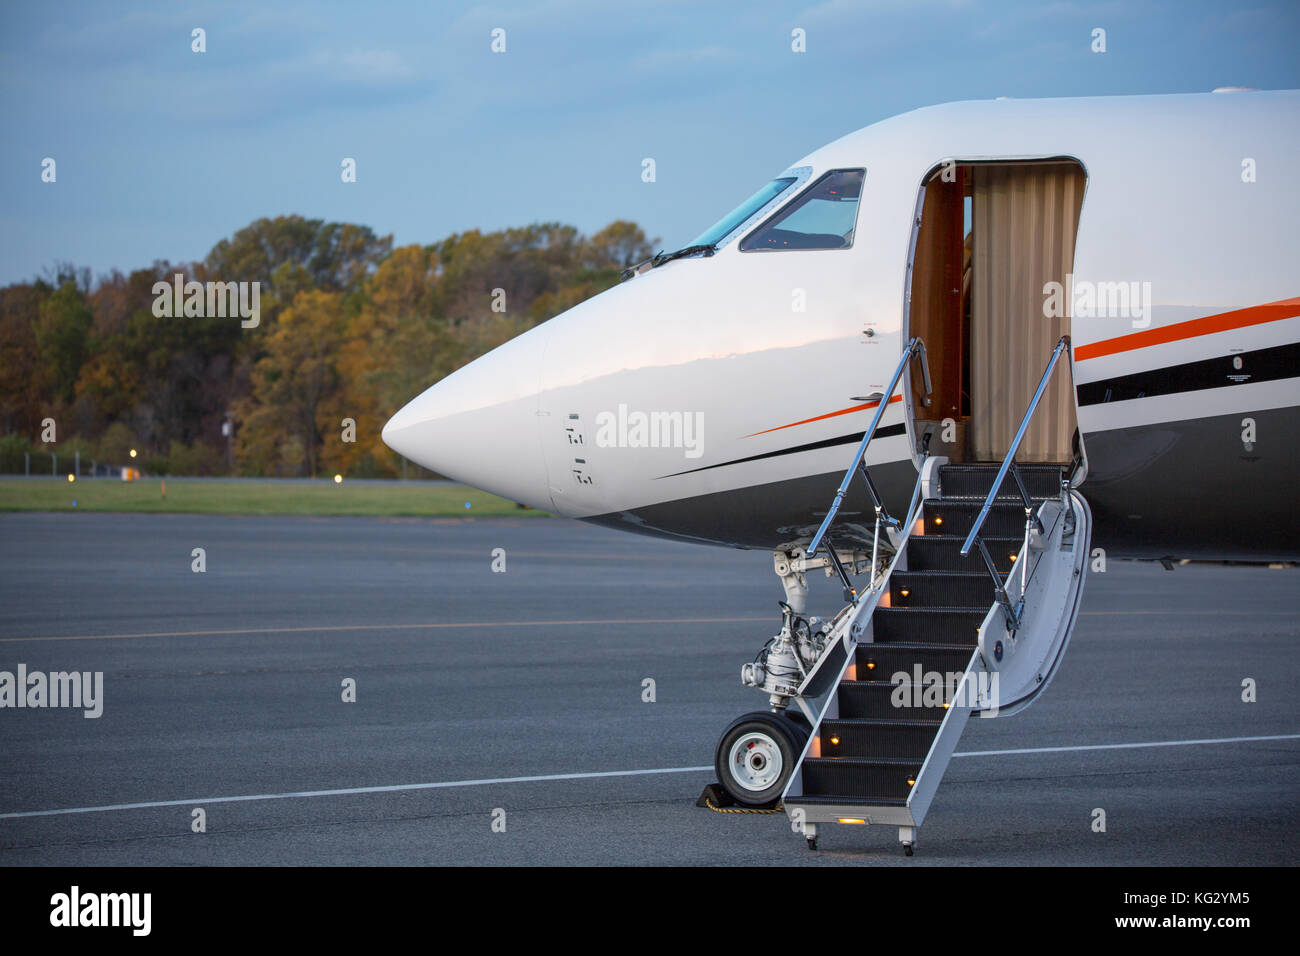 Lets travel in luxury, private jet charter is the only way to see the world. Stock Photo